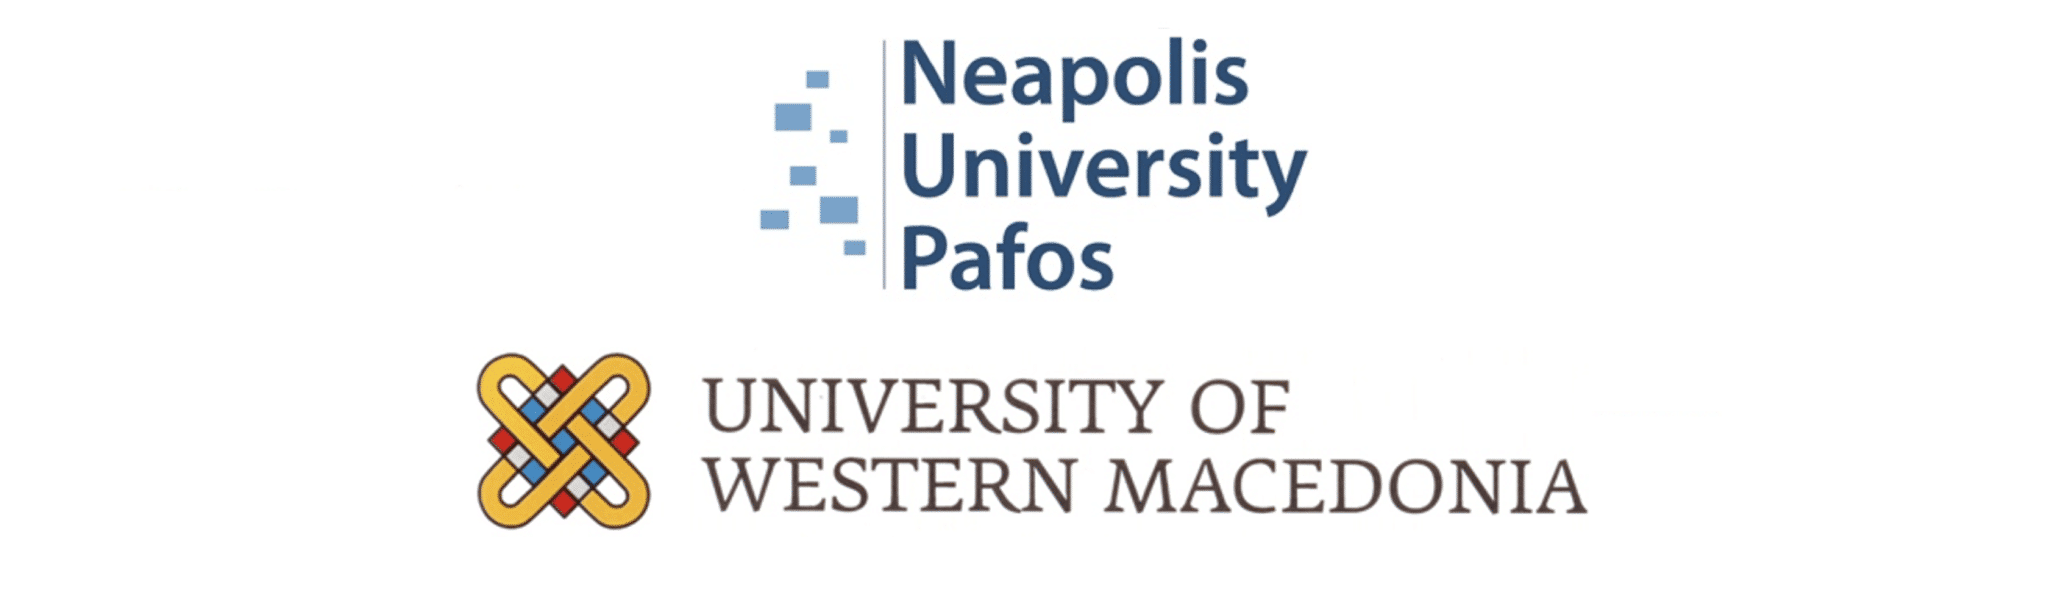 uowm and nup logos en